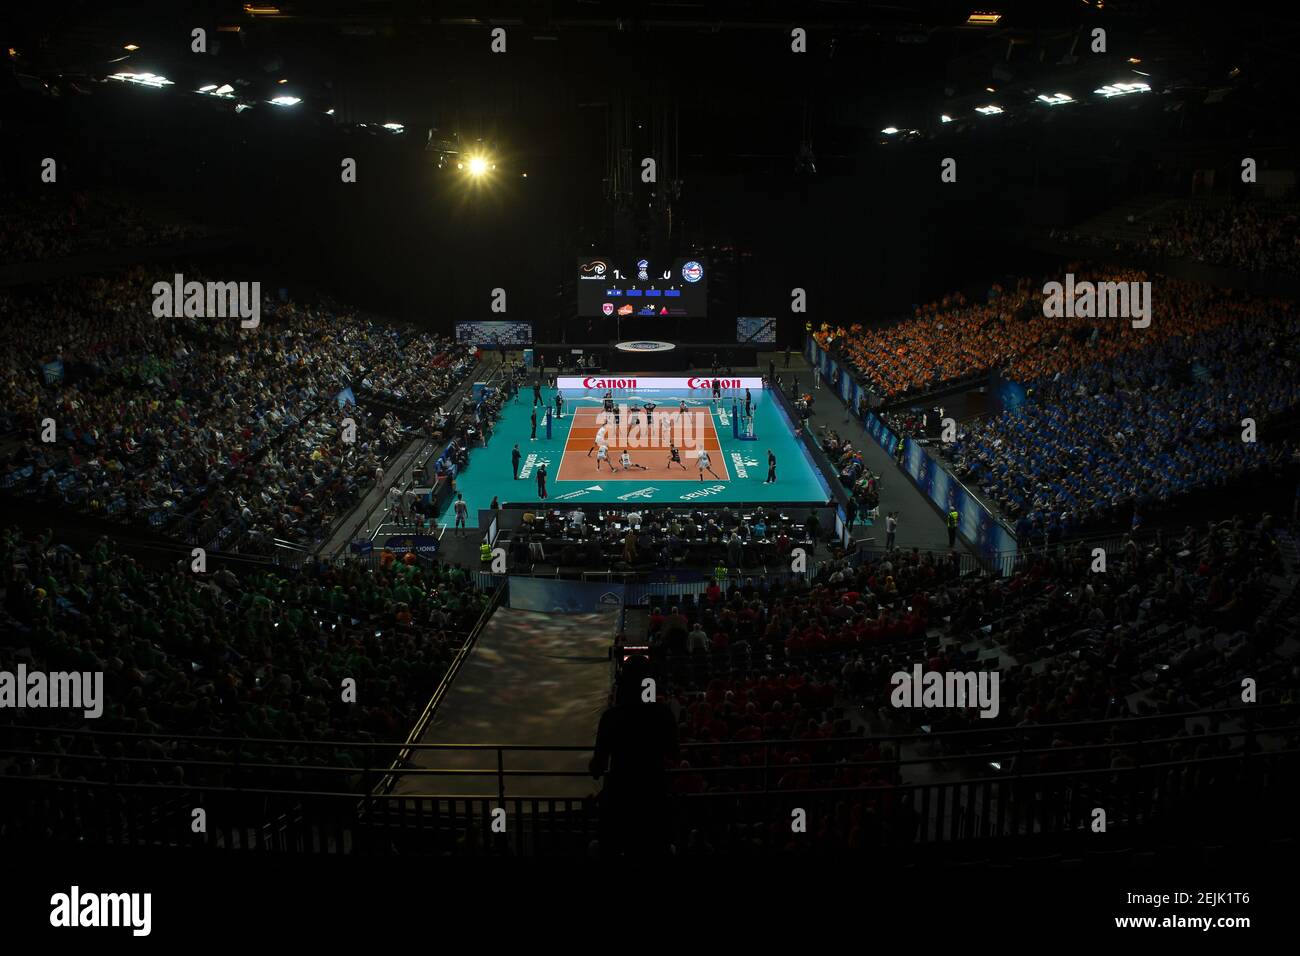 discretie En team formule Illustration picture shows the Antwerp Sportpaleis during the match between  Lindemans Aalst and Knack Roeselare, the final match in the men Belgian  volleyball cup competition, Sunday 16 February 2020 in Merksem, Antwerp.